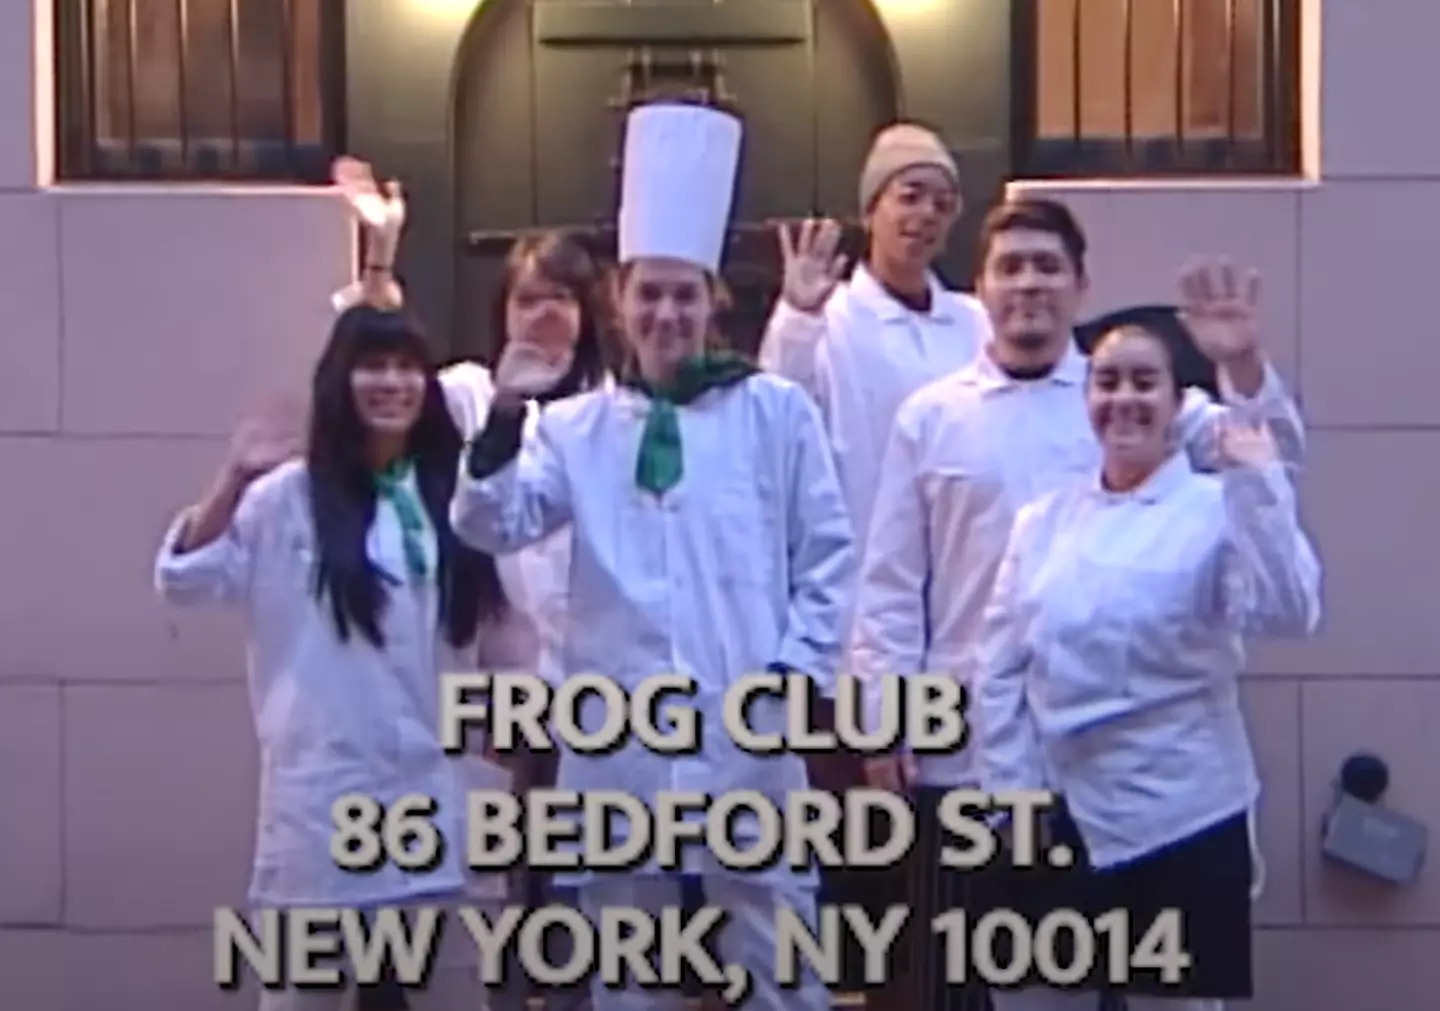 Frog Club opened its doors earlier in February.